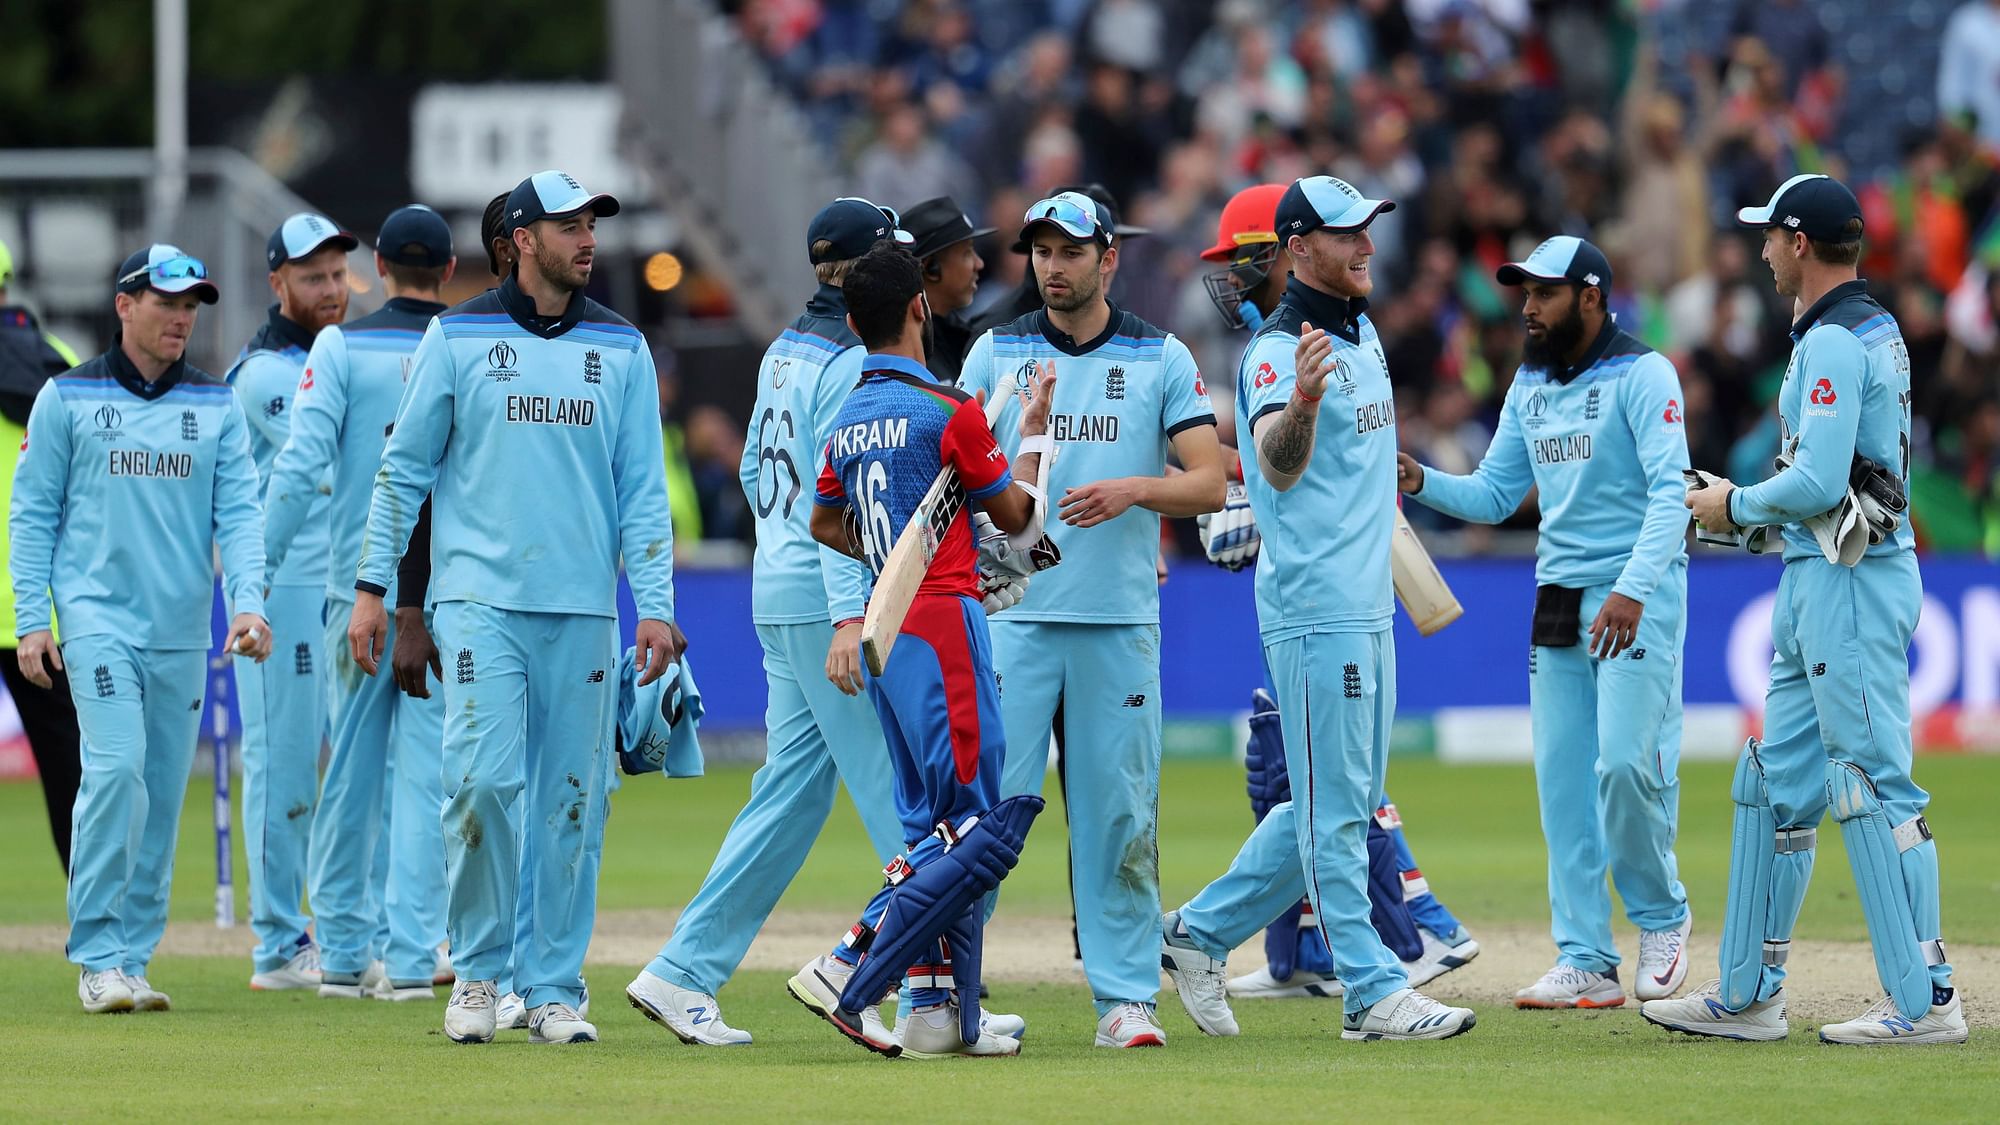 England players celebrate their win in the Cricket World Cup match against Afghanistan at Old Trafford in Manchester, England, Tuesday, June 18, 2019.&nbsp;